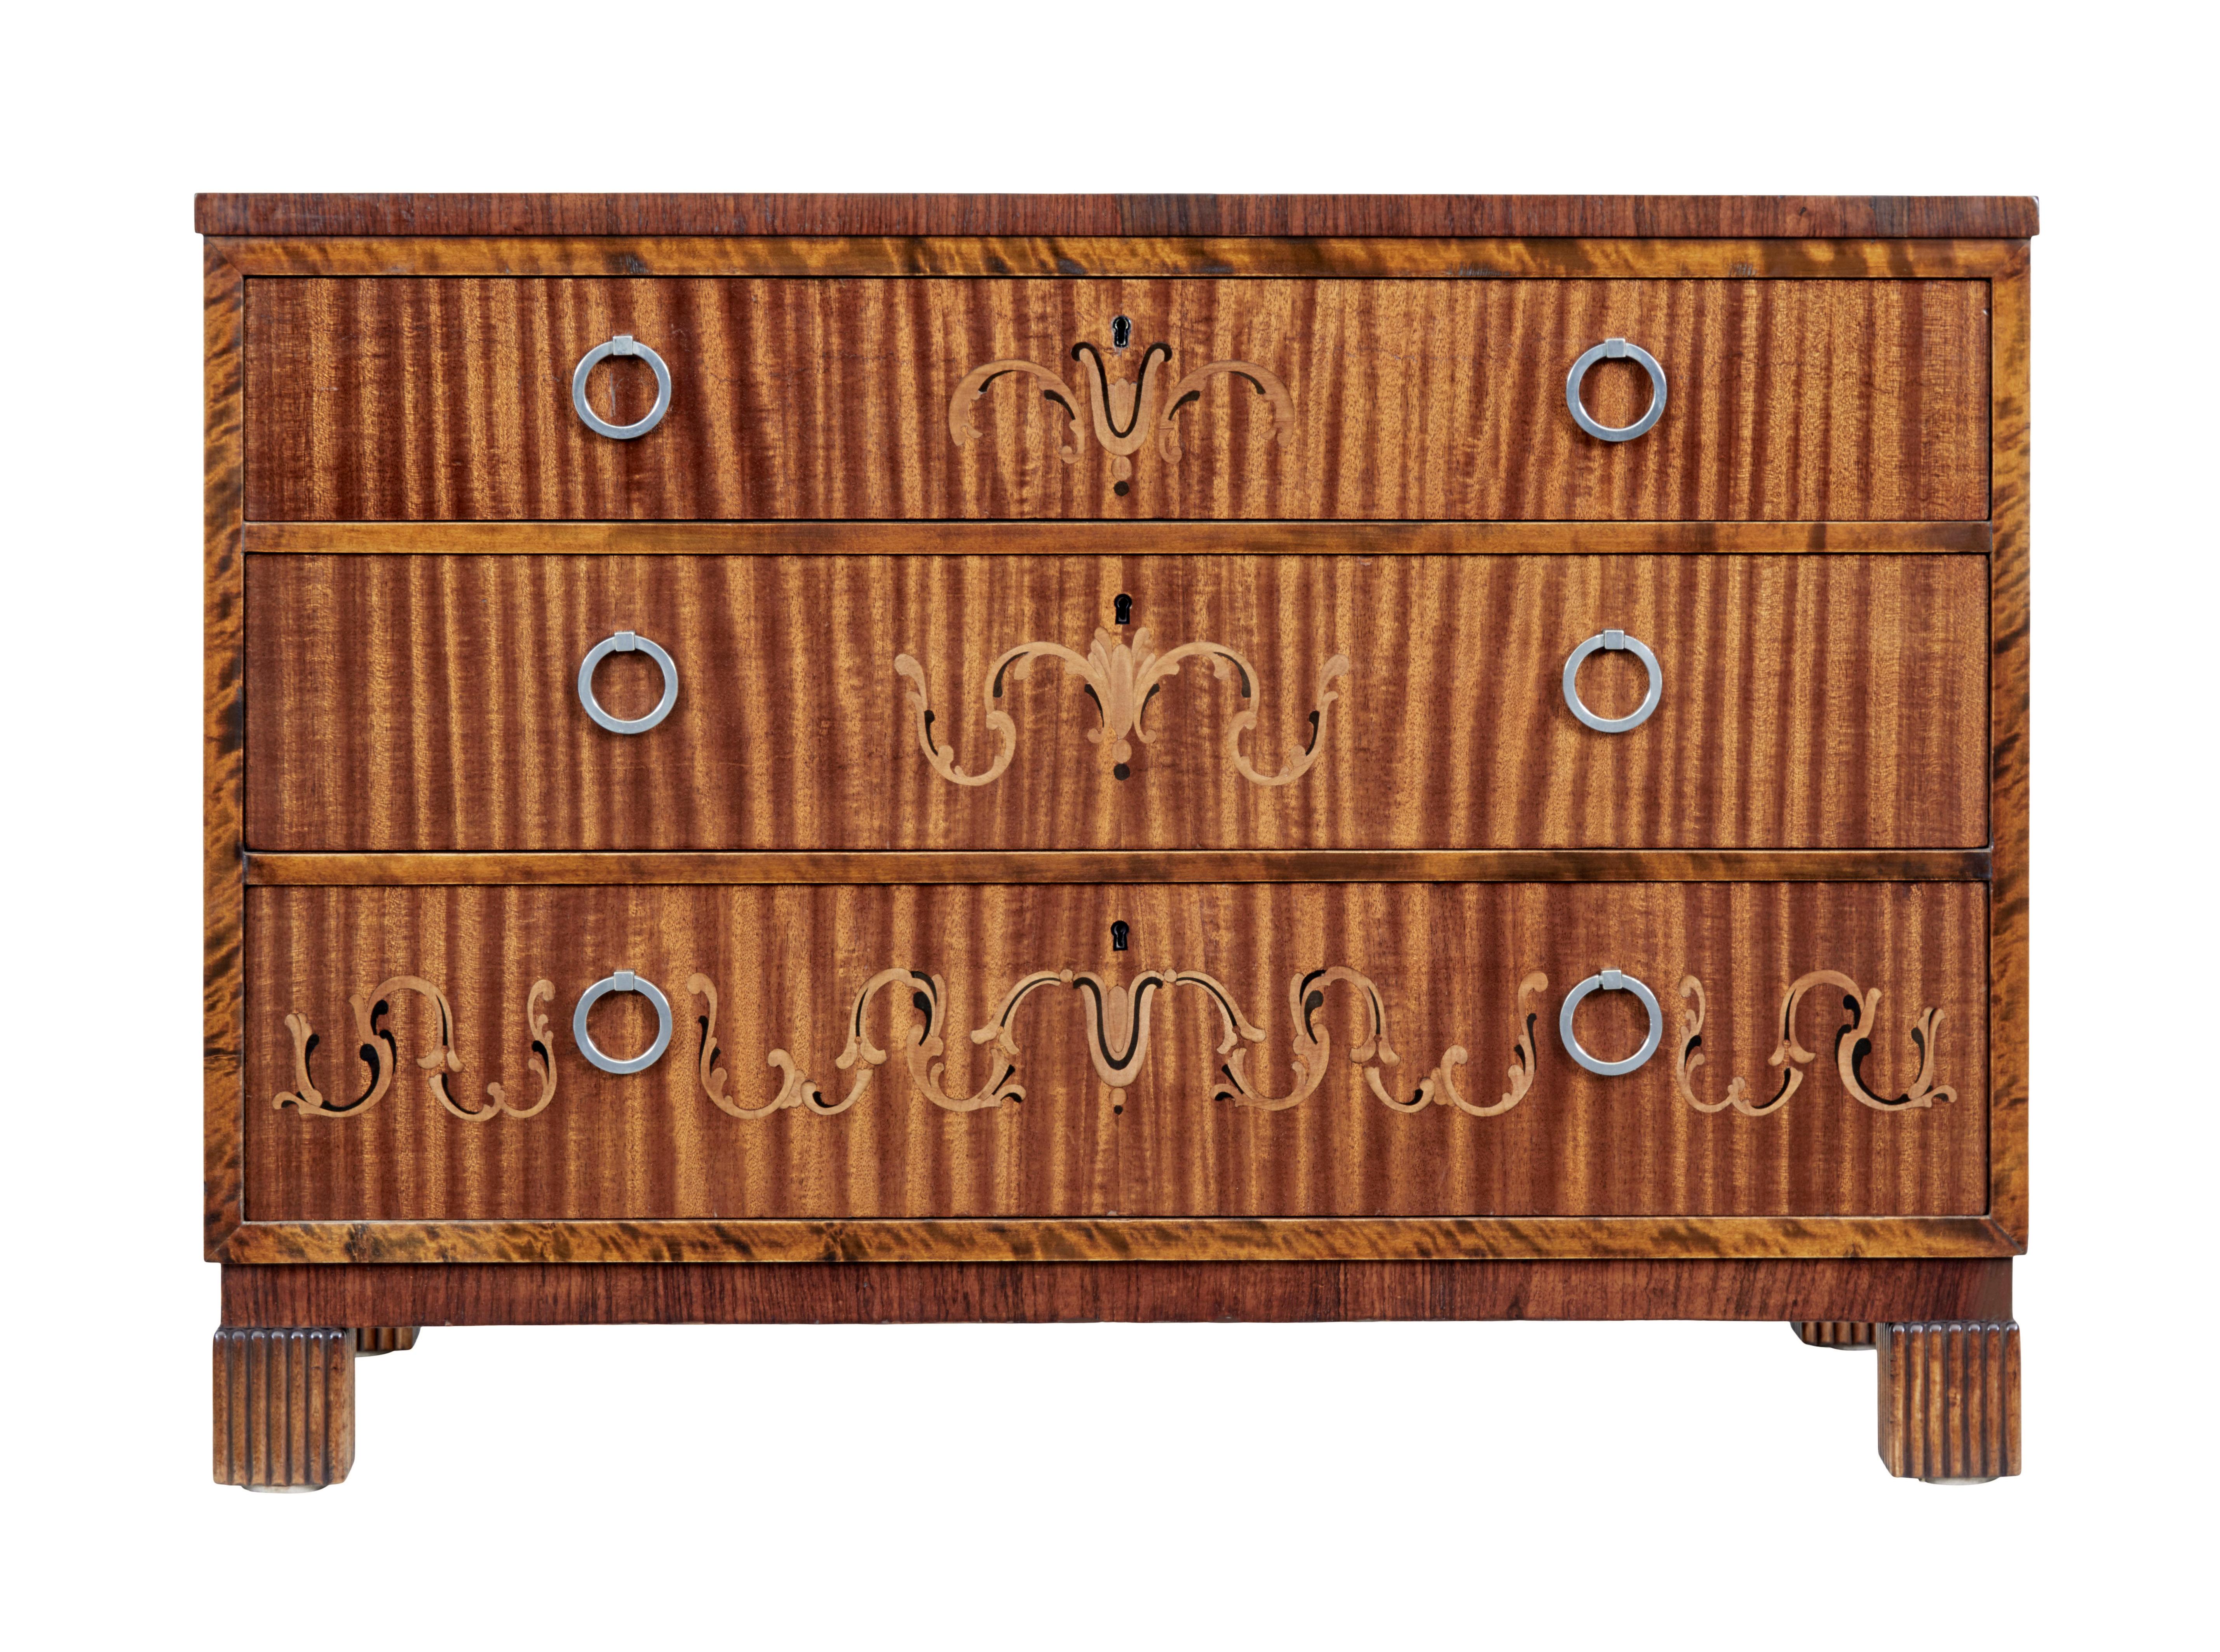 Swedish art deco chest of drawers, circa 1930.

Dark stained birch outer frame. 3 graduating mahogany drawer fronts inlaid with birch and ebonized swags, fitted with brush steel ring handles.

Standing on fluted block feet.

Minor surface marks to